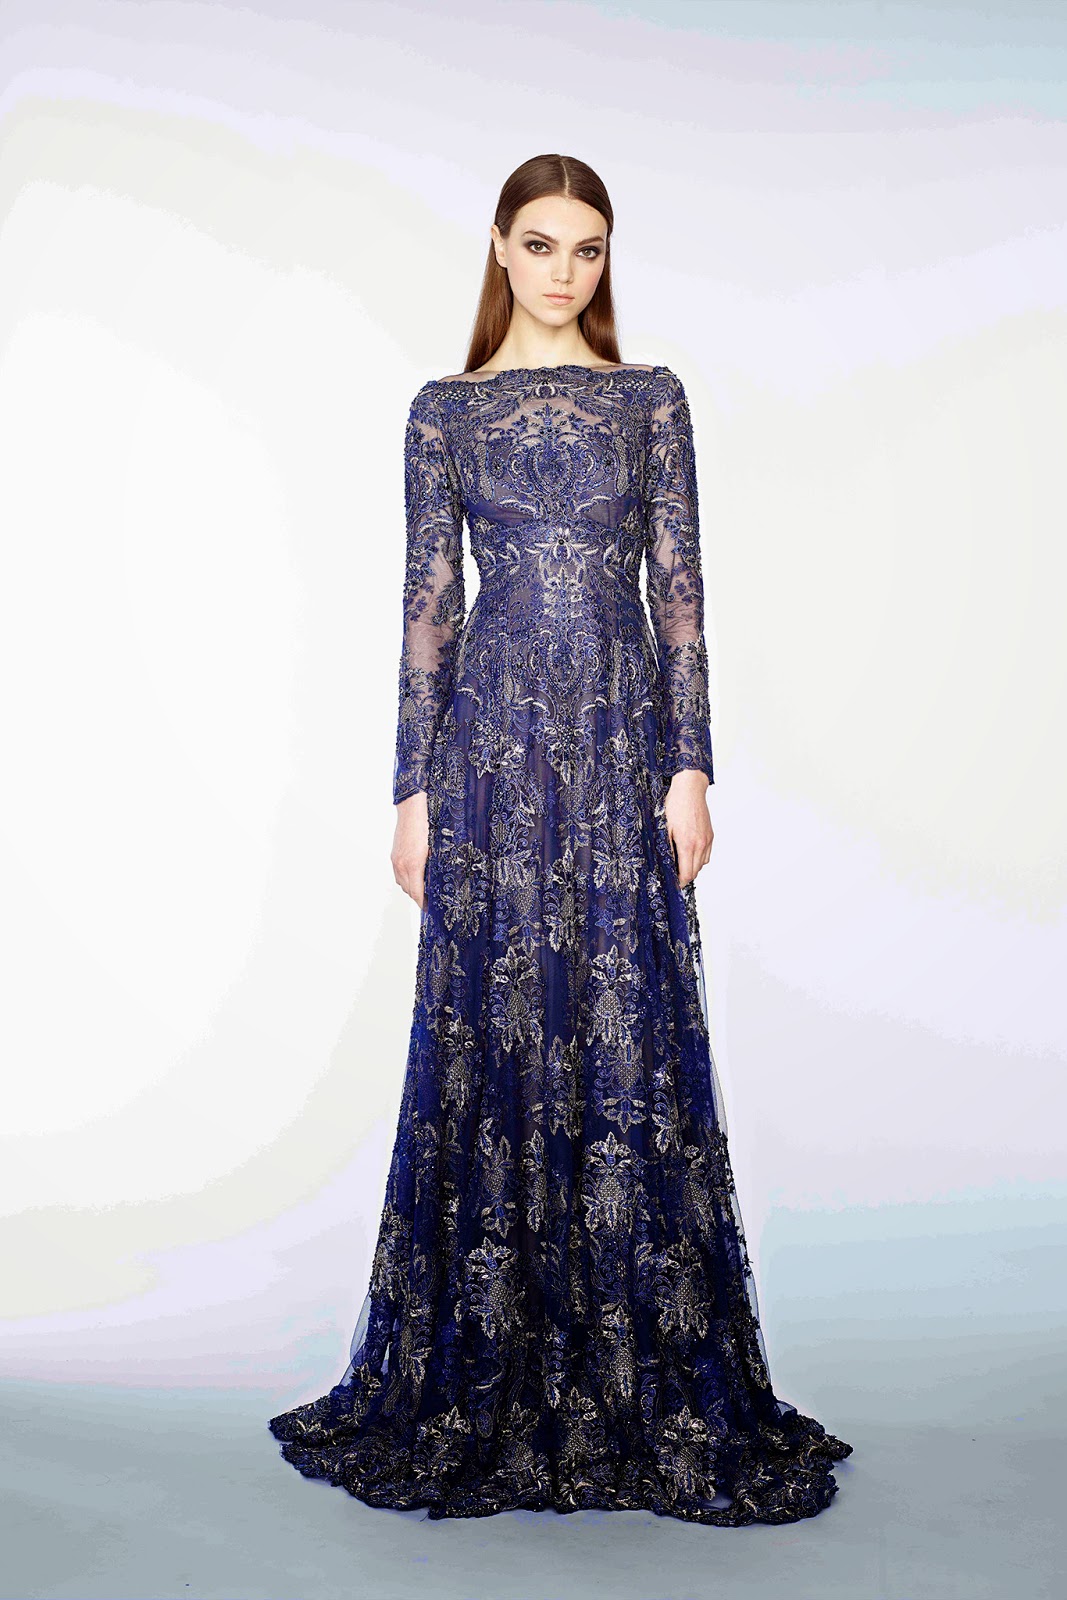 Serendipitylands: MARCHESA COLLECTION PRE-FALL 2015